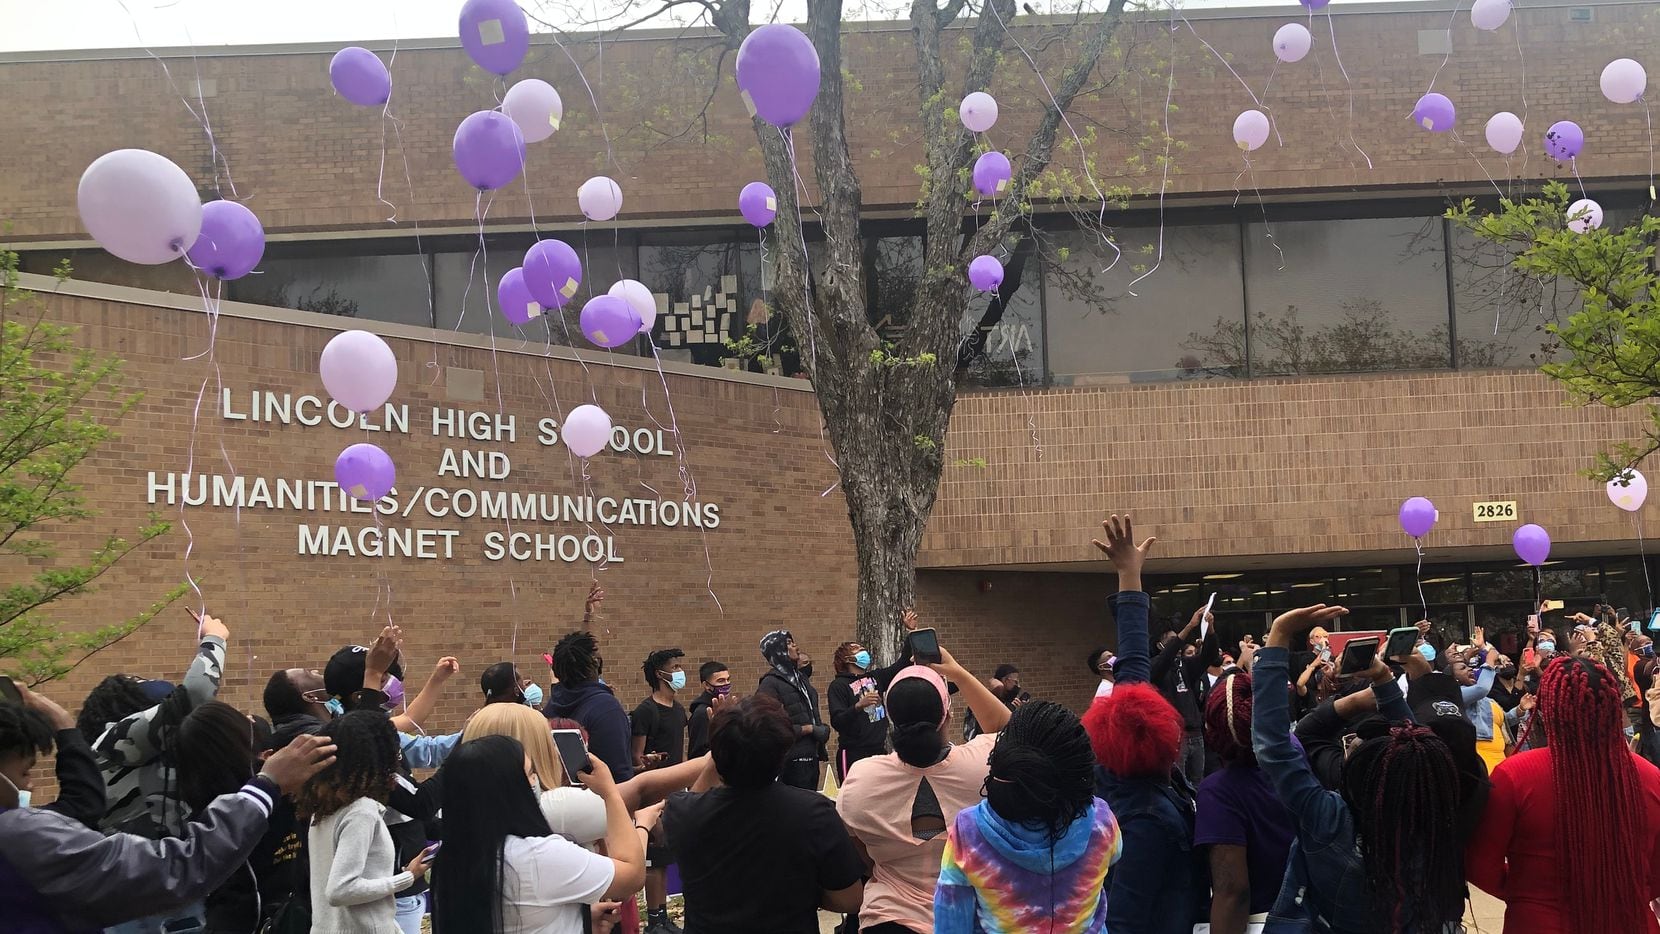 Seniors at Dallas Lincoln High School participate in a balloon release on Monday, April 12, 2021, as part of celebrations around their first day of in-person classes since the start of the COVID-19 pandemic.